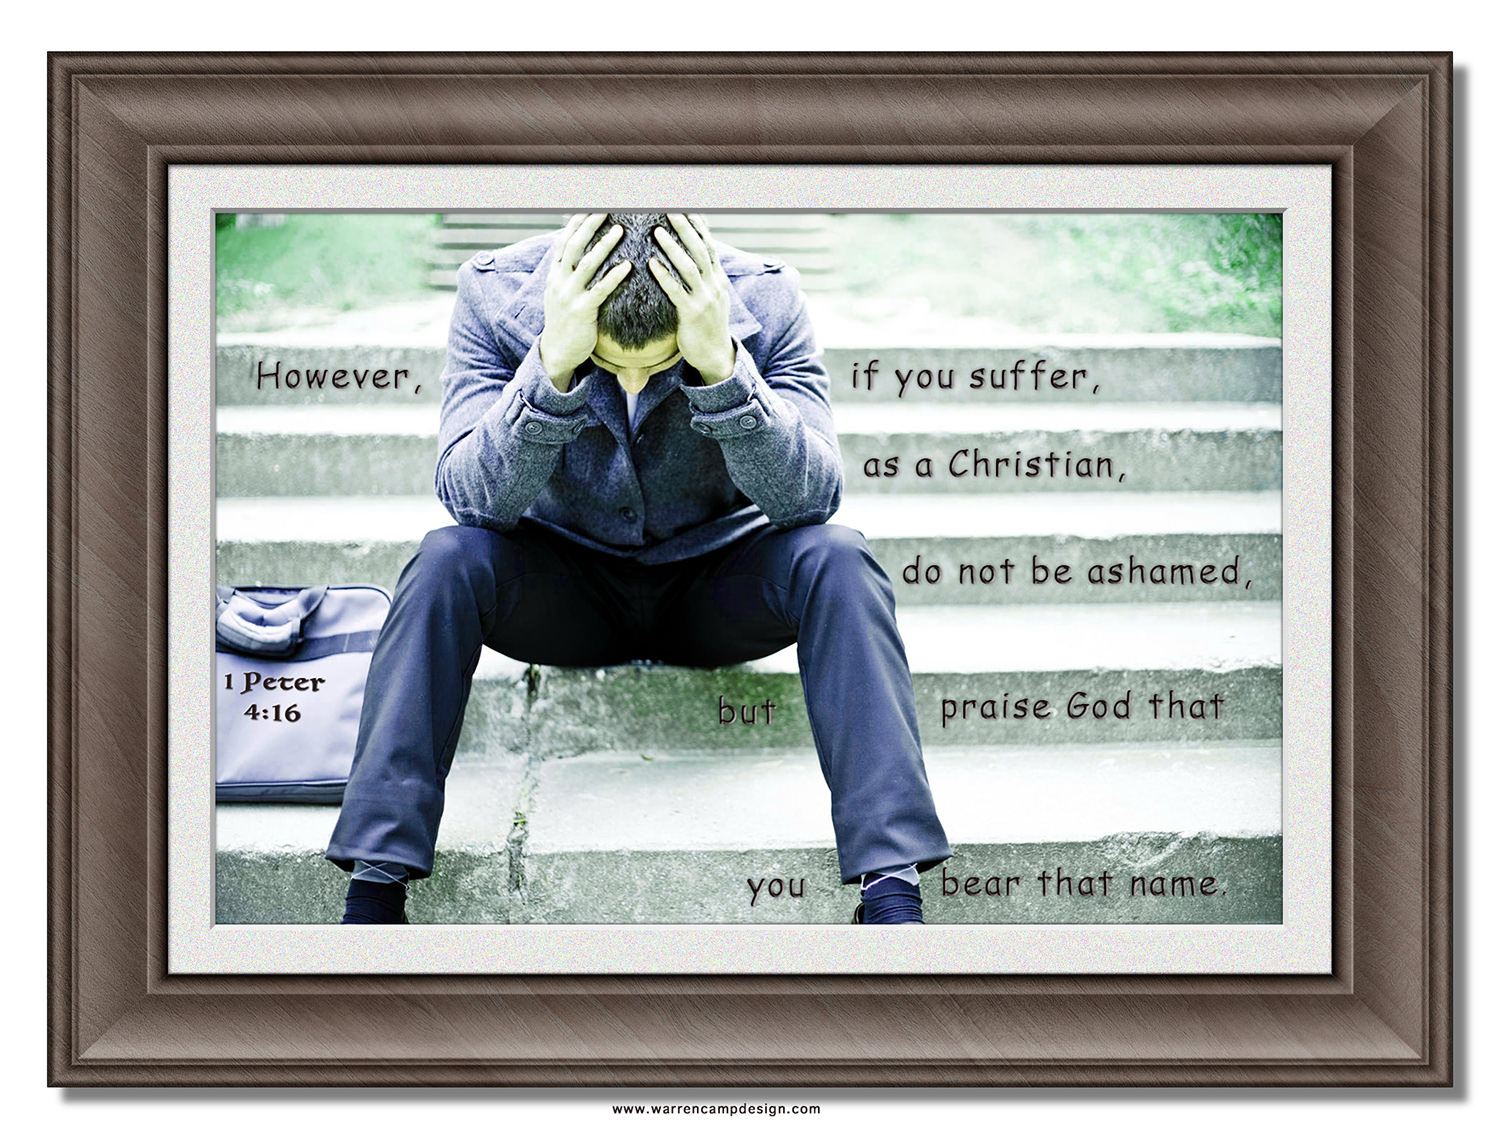 Scripture picture of 1st Peter 4:16, emphasizing the importance of how Christians are to suffer.